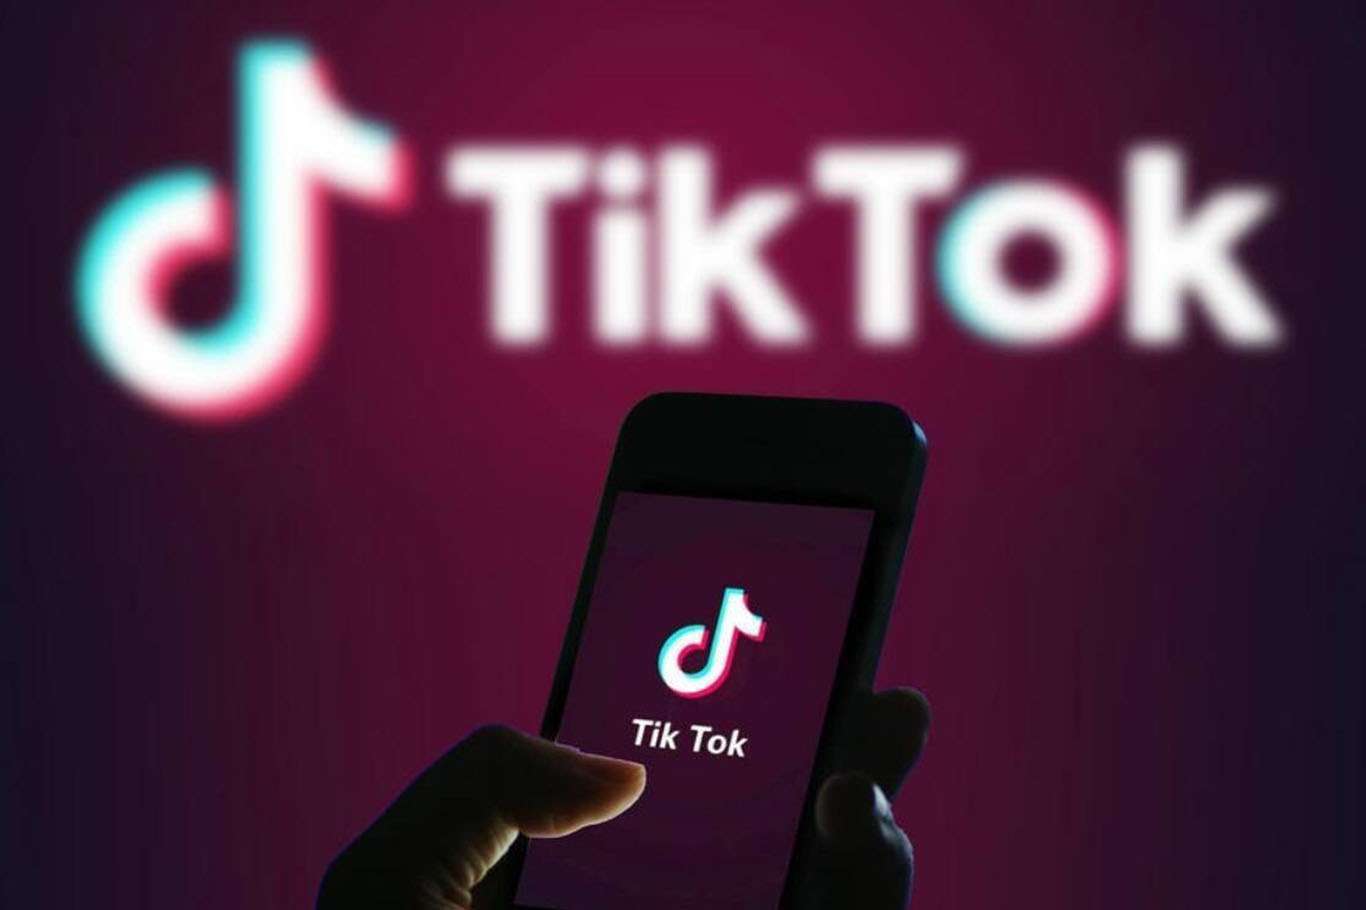 Chinese version of Tiktok to limit users under 14 years old to 40 minutes per day